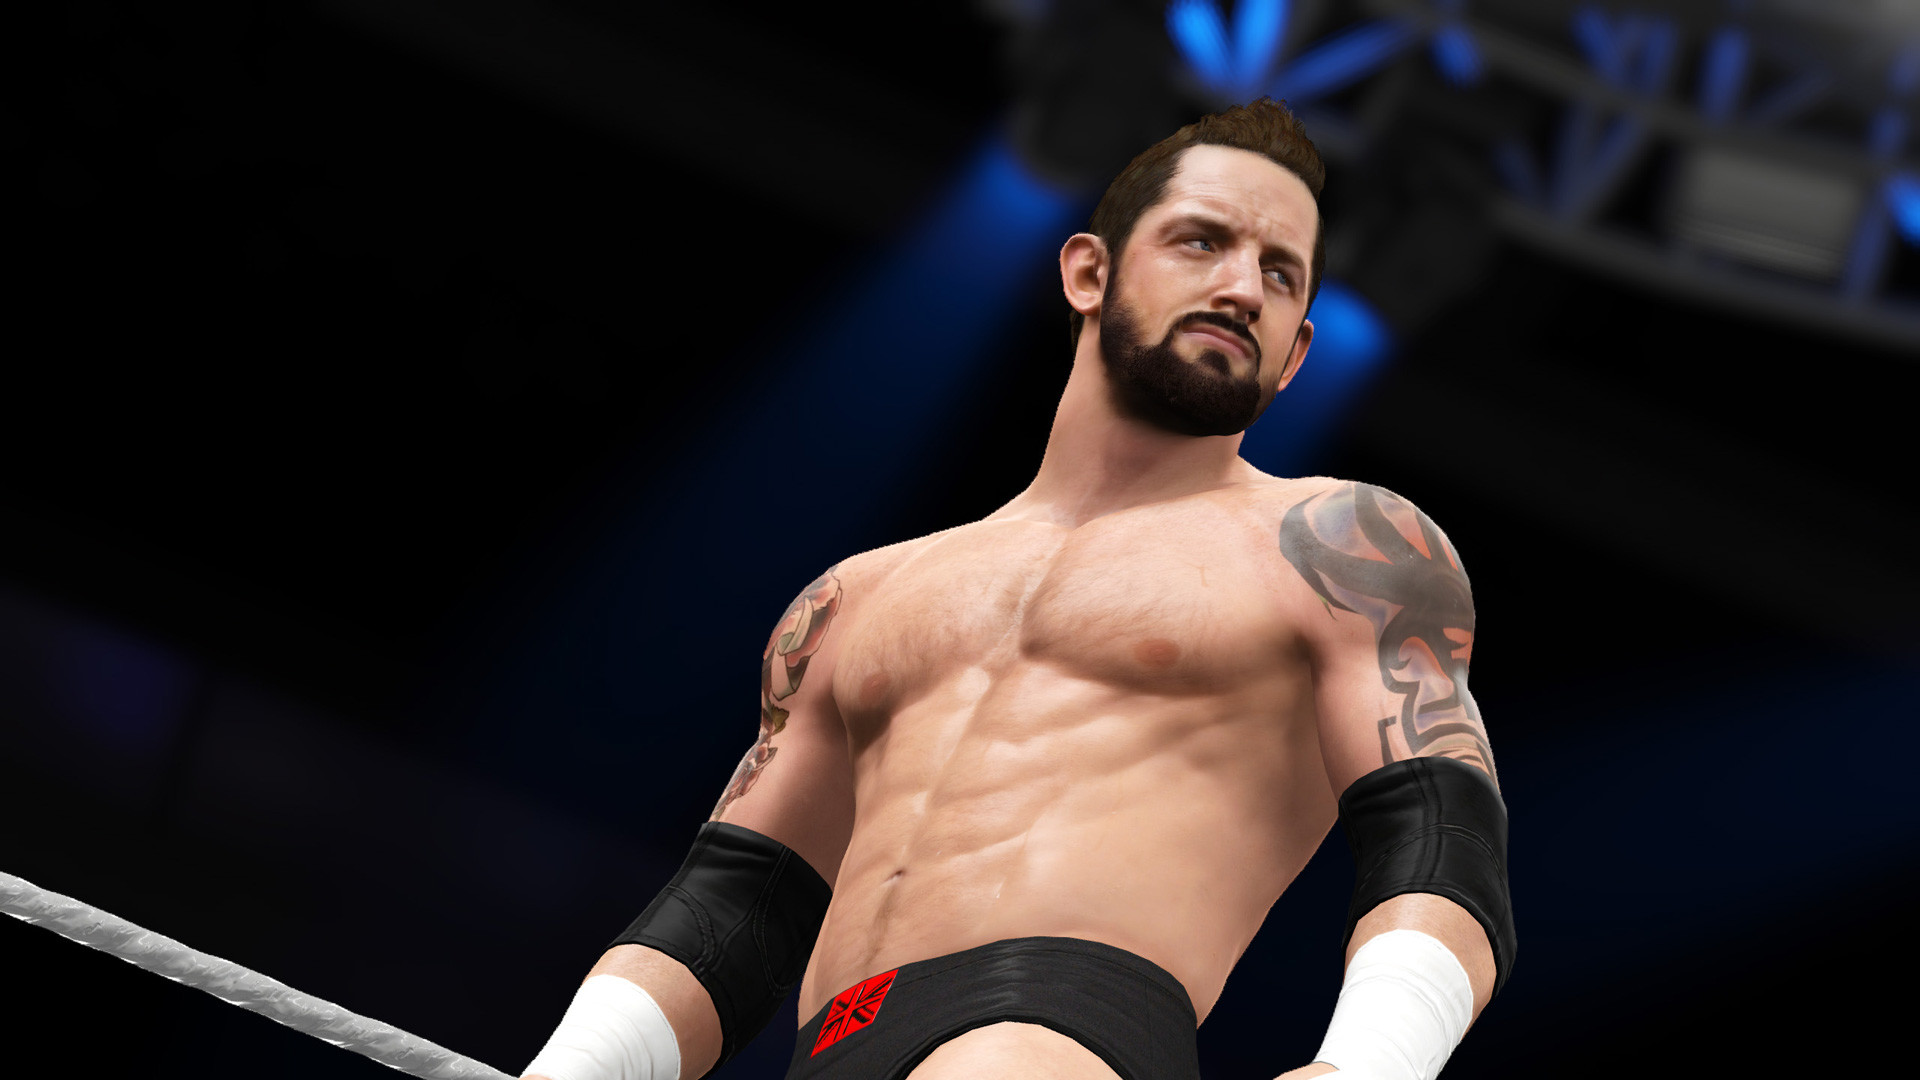 1920x1080 WWE 2K16 Wallpapers HD. Pictures of WWE 2K16